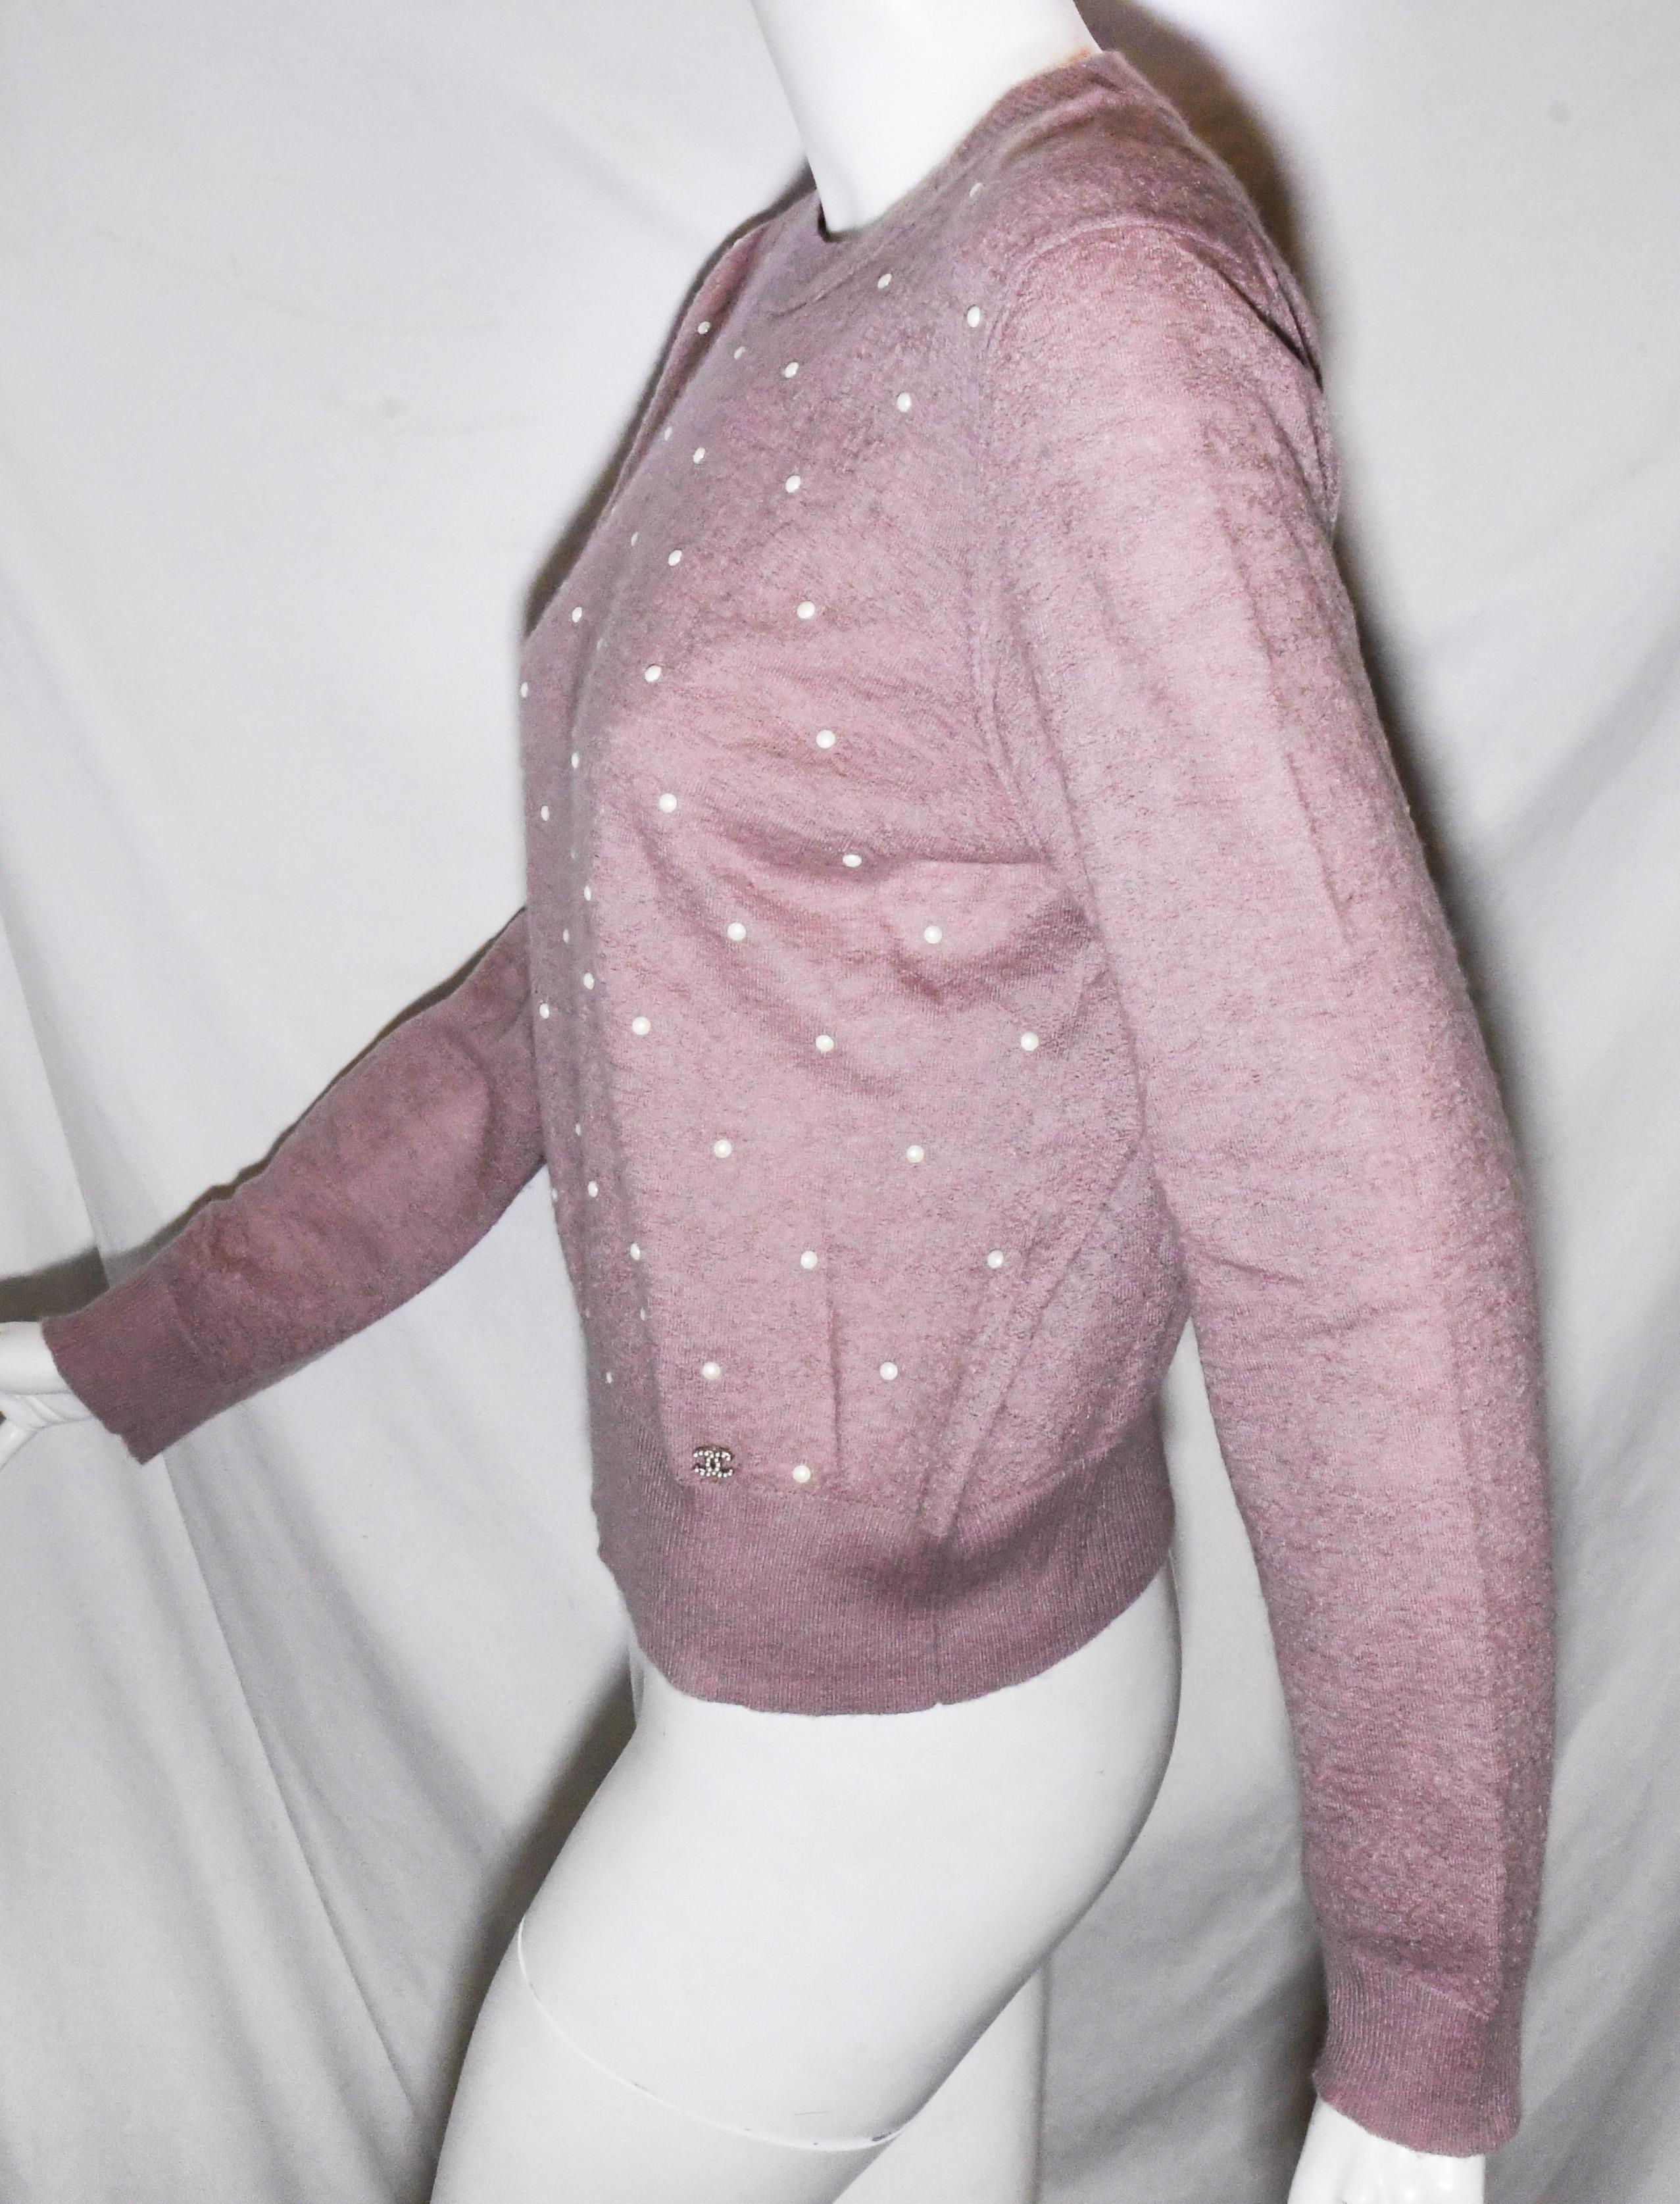 Chanel lavender mohair and cashmere blend  long sleeve sweater.  This sweater is embellished with faux pearls dots allover the front.  This pullover is from the pre fall 2014 collection.  Cozy up with this gorgeous Chanel pullover sweater. 